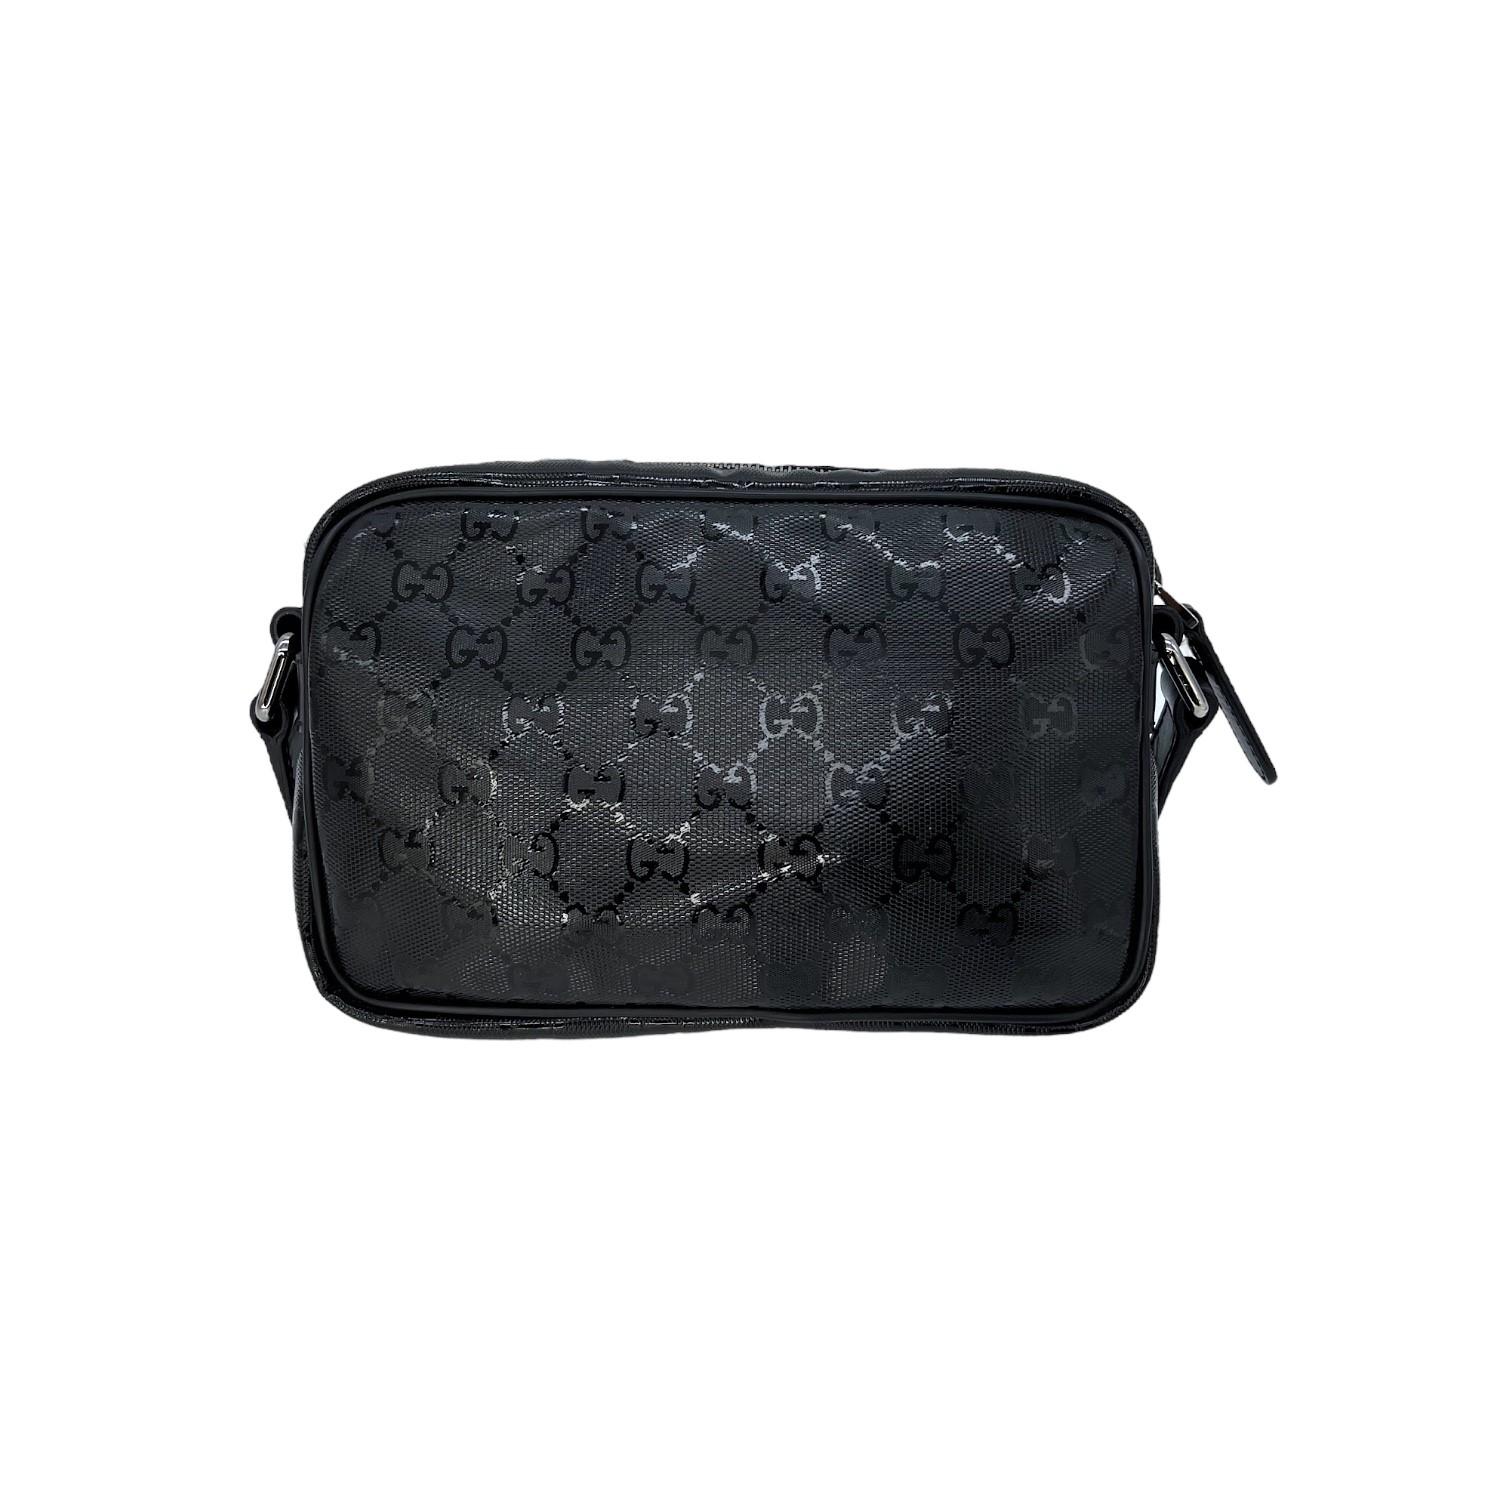 This Gucci GG Imprime Camera Bag was made in Italy and it is finely crafted of a black Gucci GG PVC exterior with leather trimming and silver-tone hardware features. It has a flat leather adjustable shoulder strap. It has a zipper pocket on the